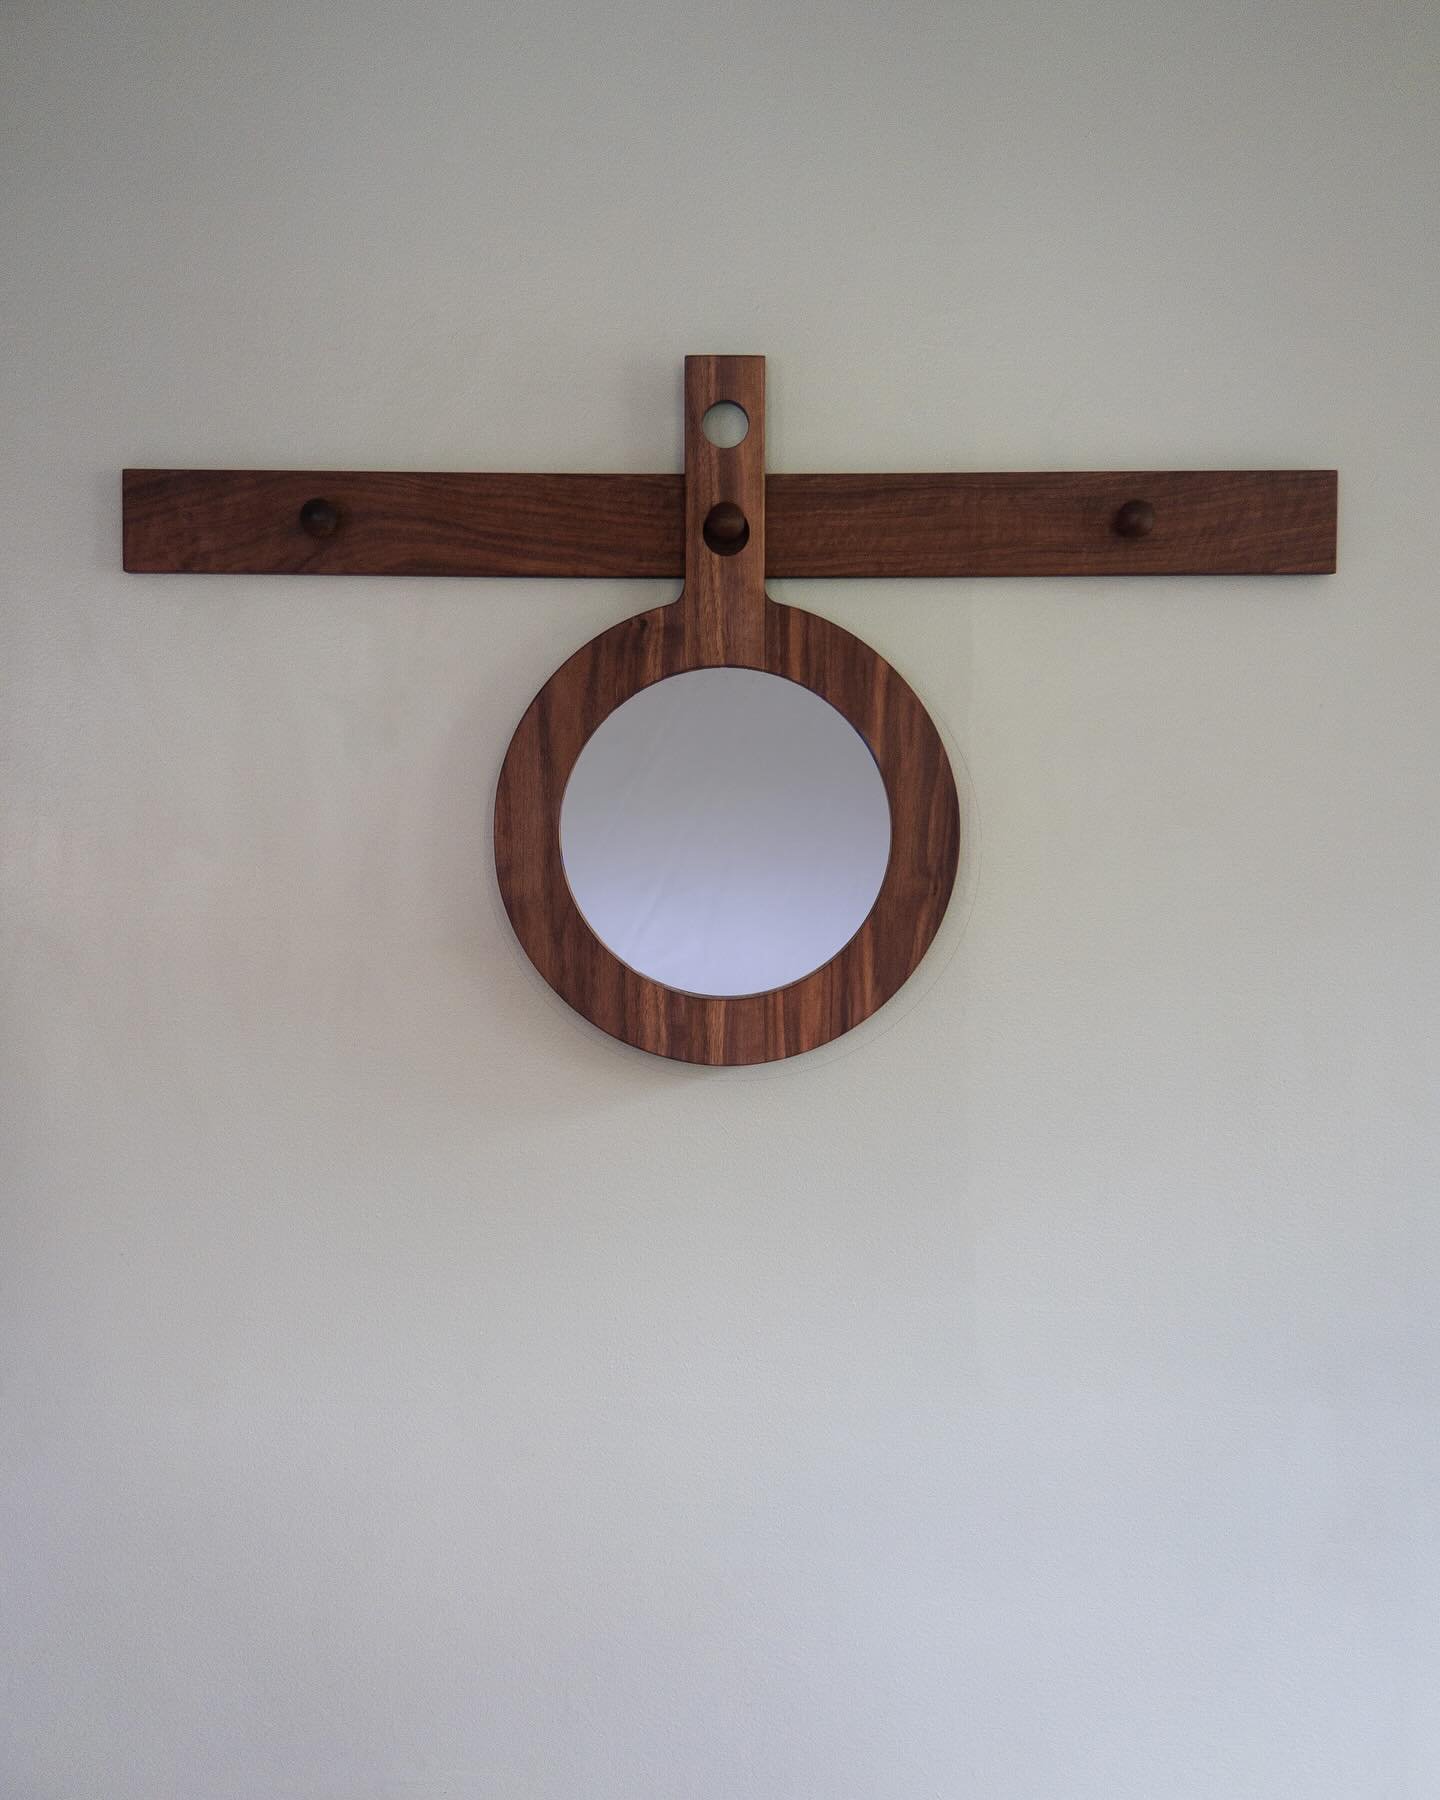 The Peggy Mirror, another member of the Peggy Collection.

Features an adjustable porthole-style mirror to bring a little extra light and play to your space. The Peggy Mirror hangs neatly on any wall hook, though particularly partial to the Peggy Peg